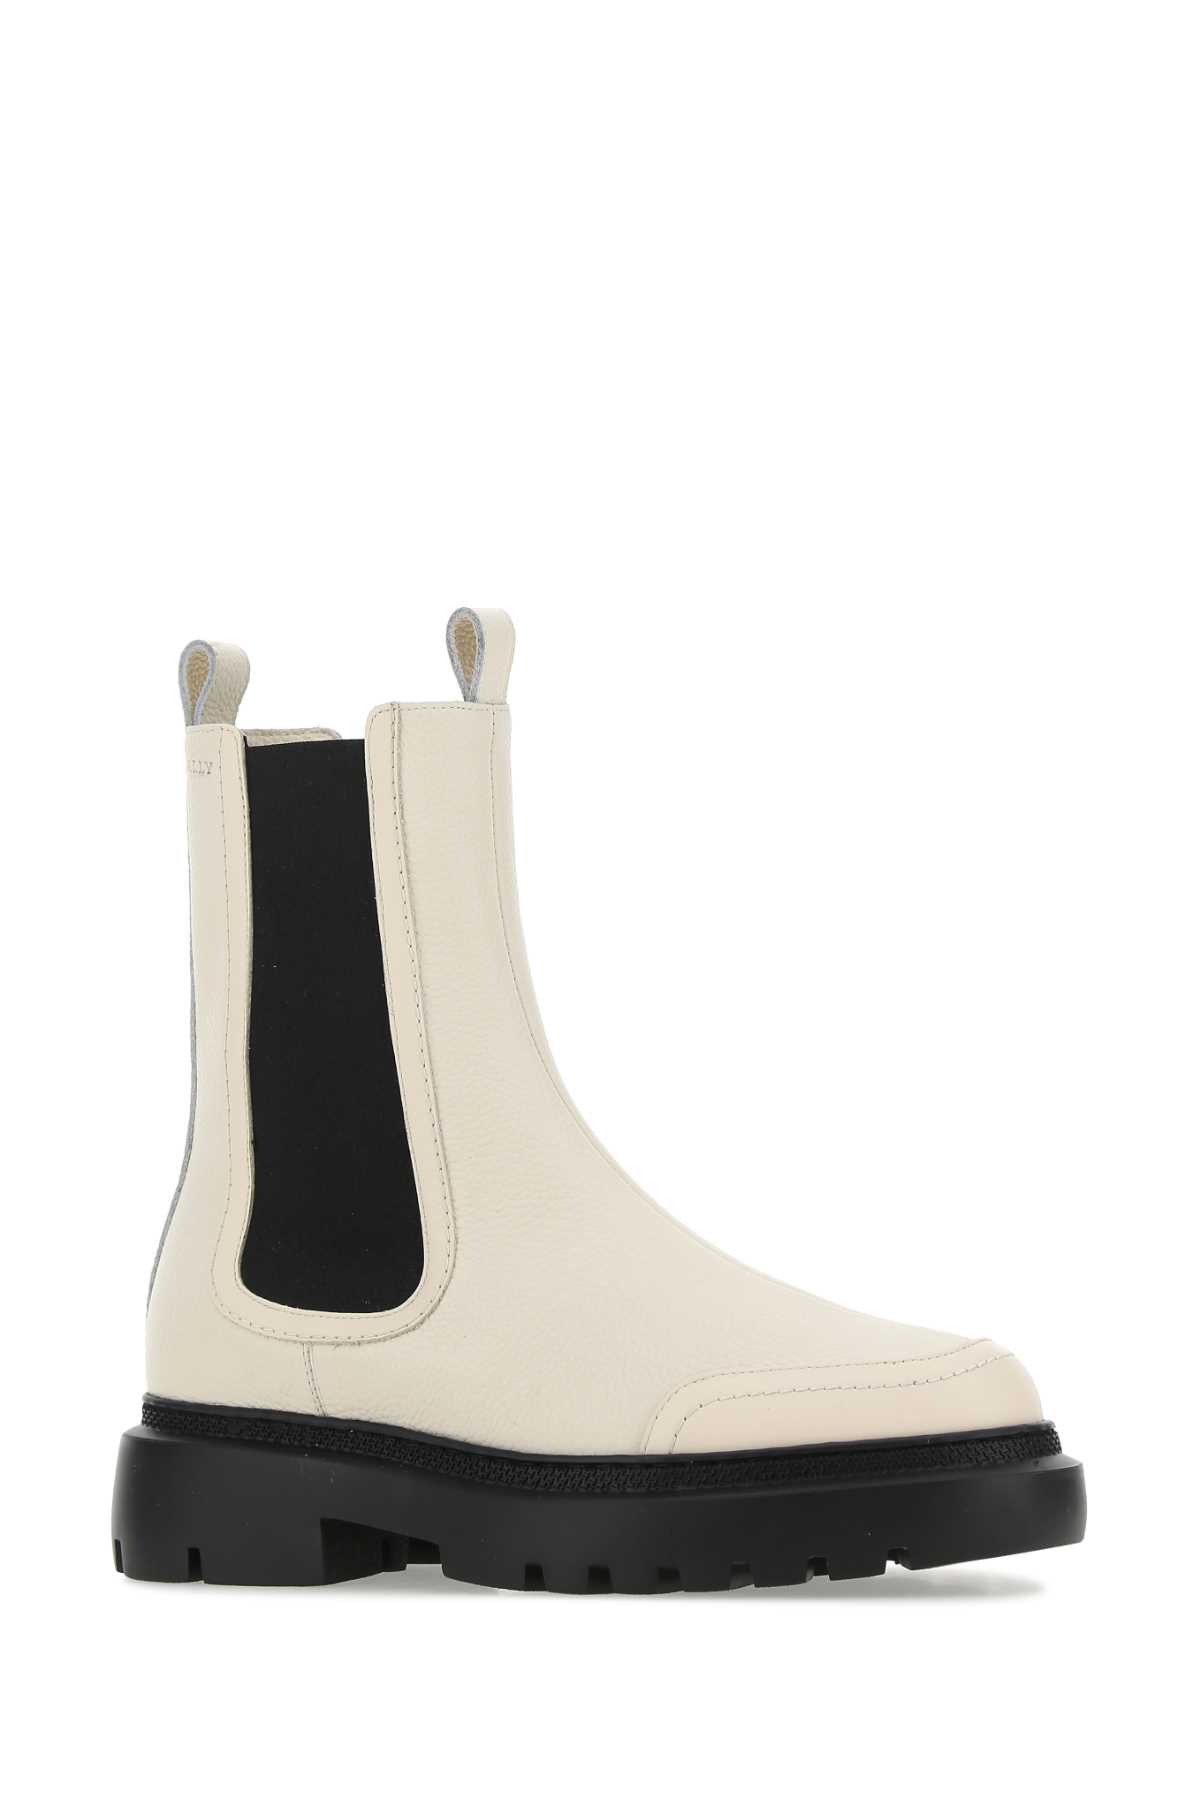 Bally Ivory Leather Ginny Boots In Bone1550